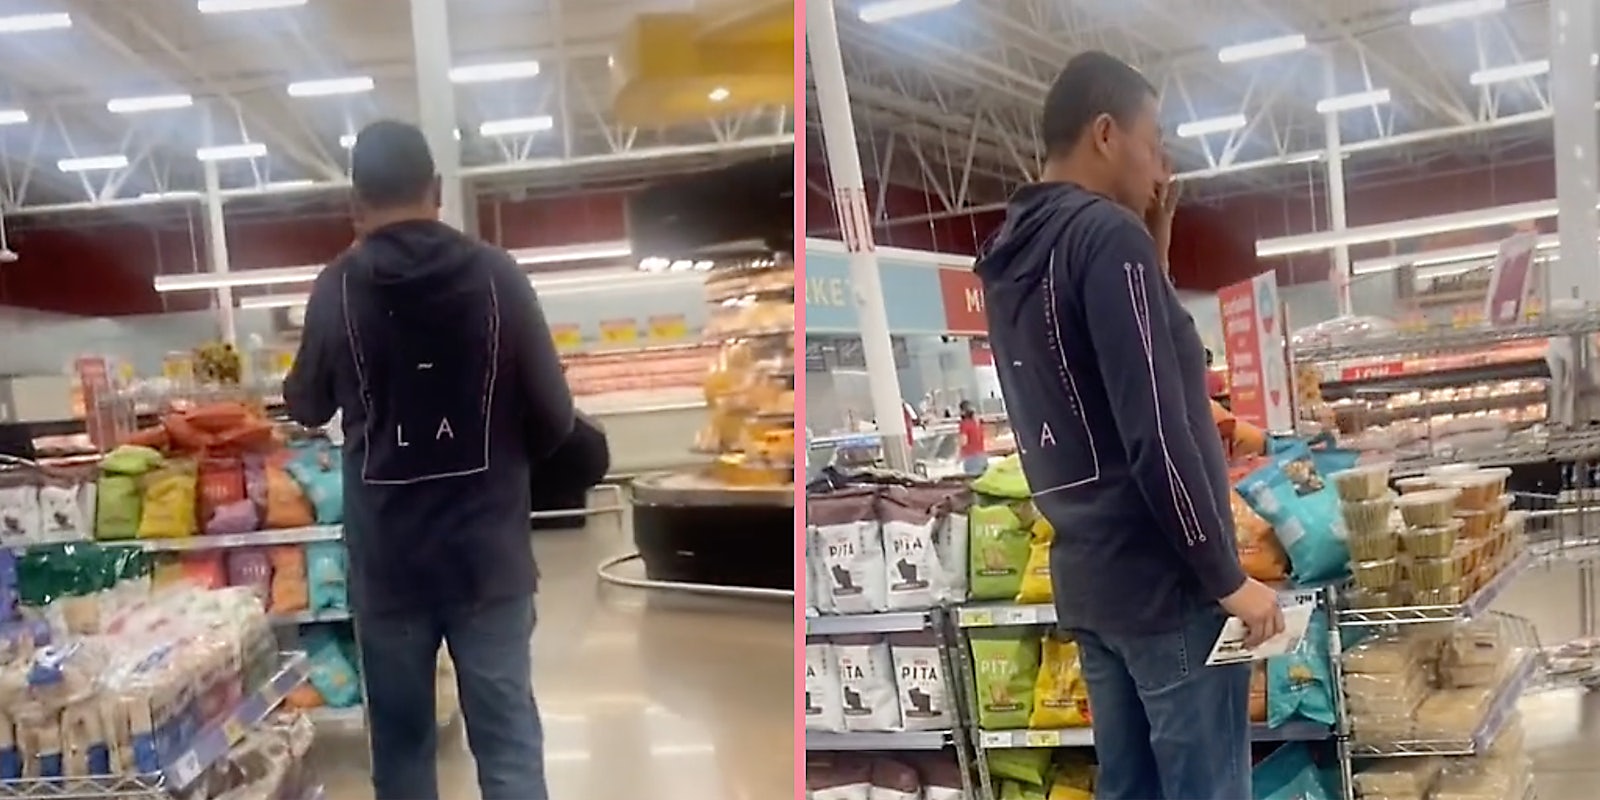 A man wearing a hoodie in a grocery store.